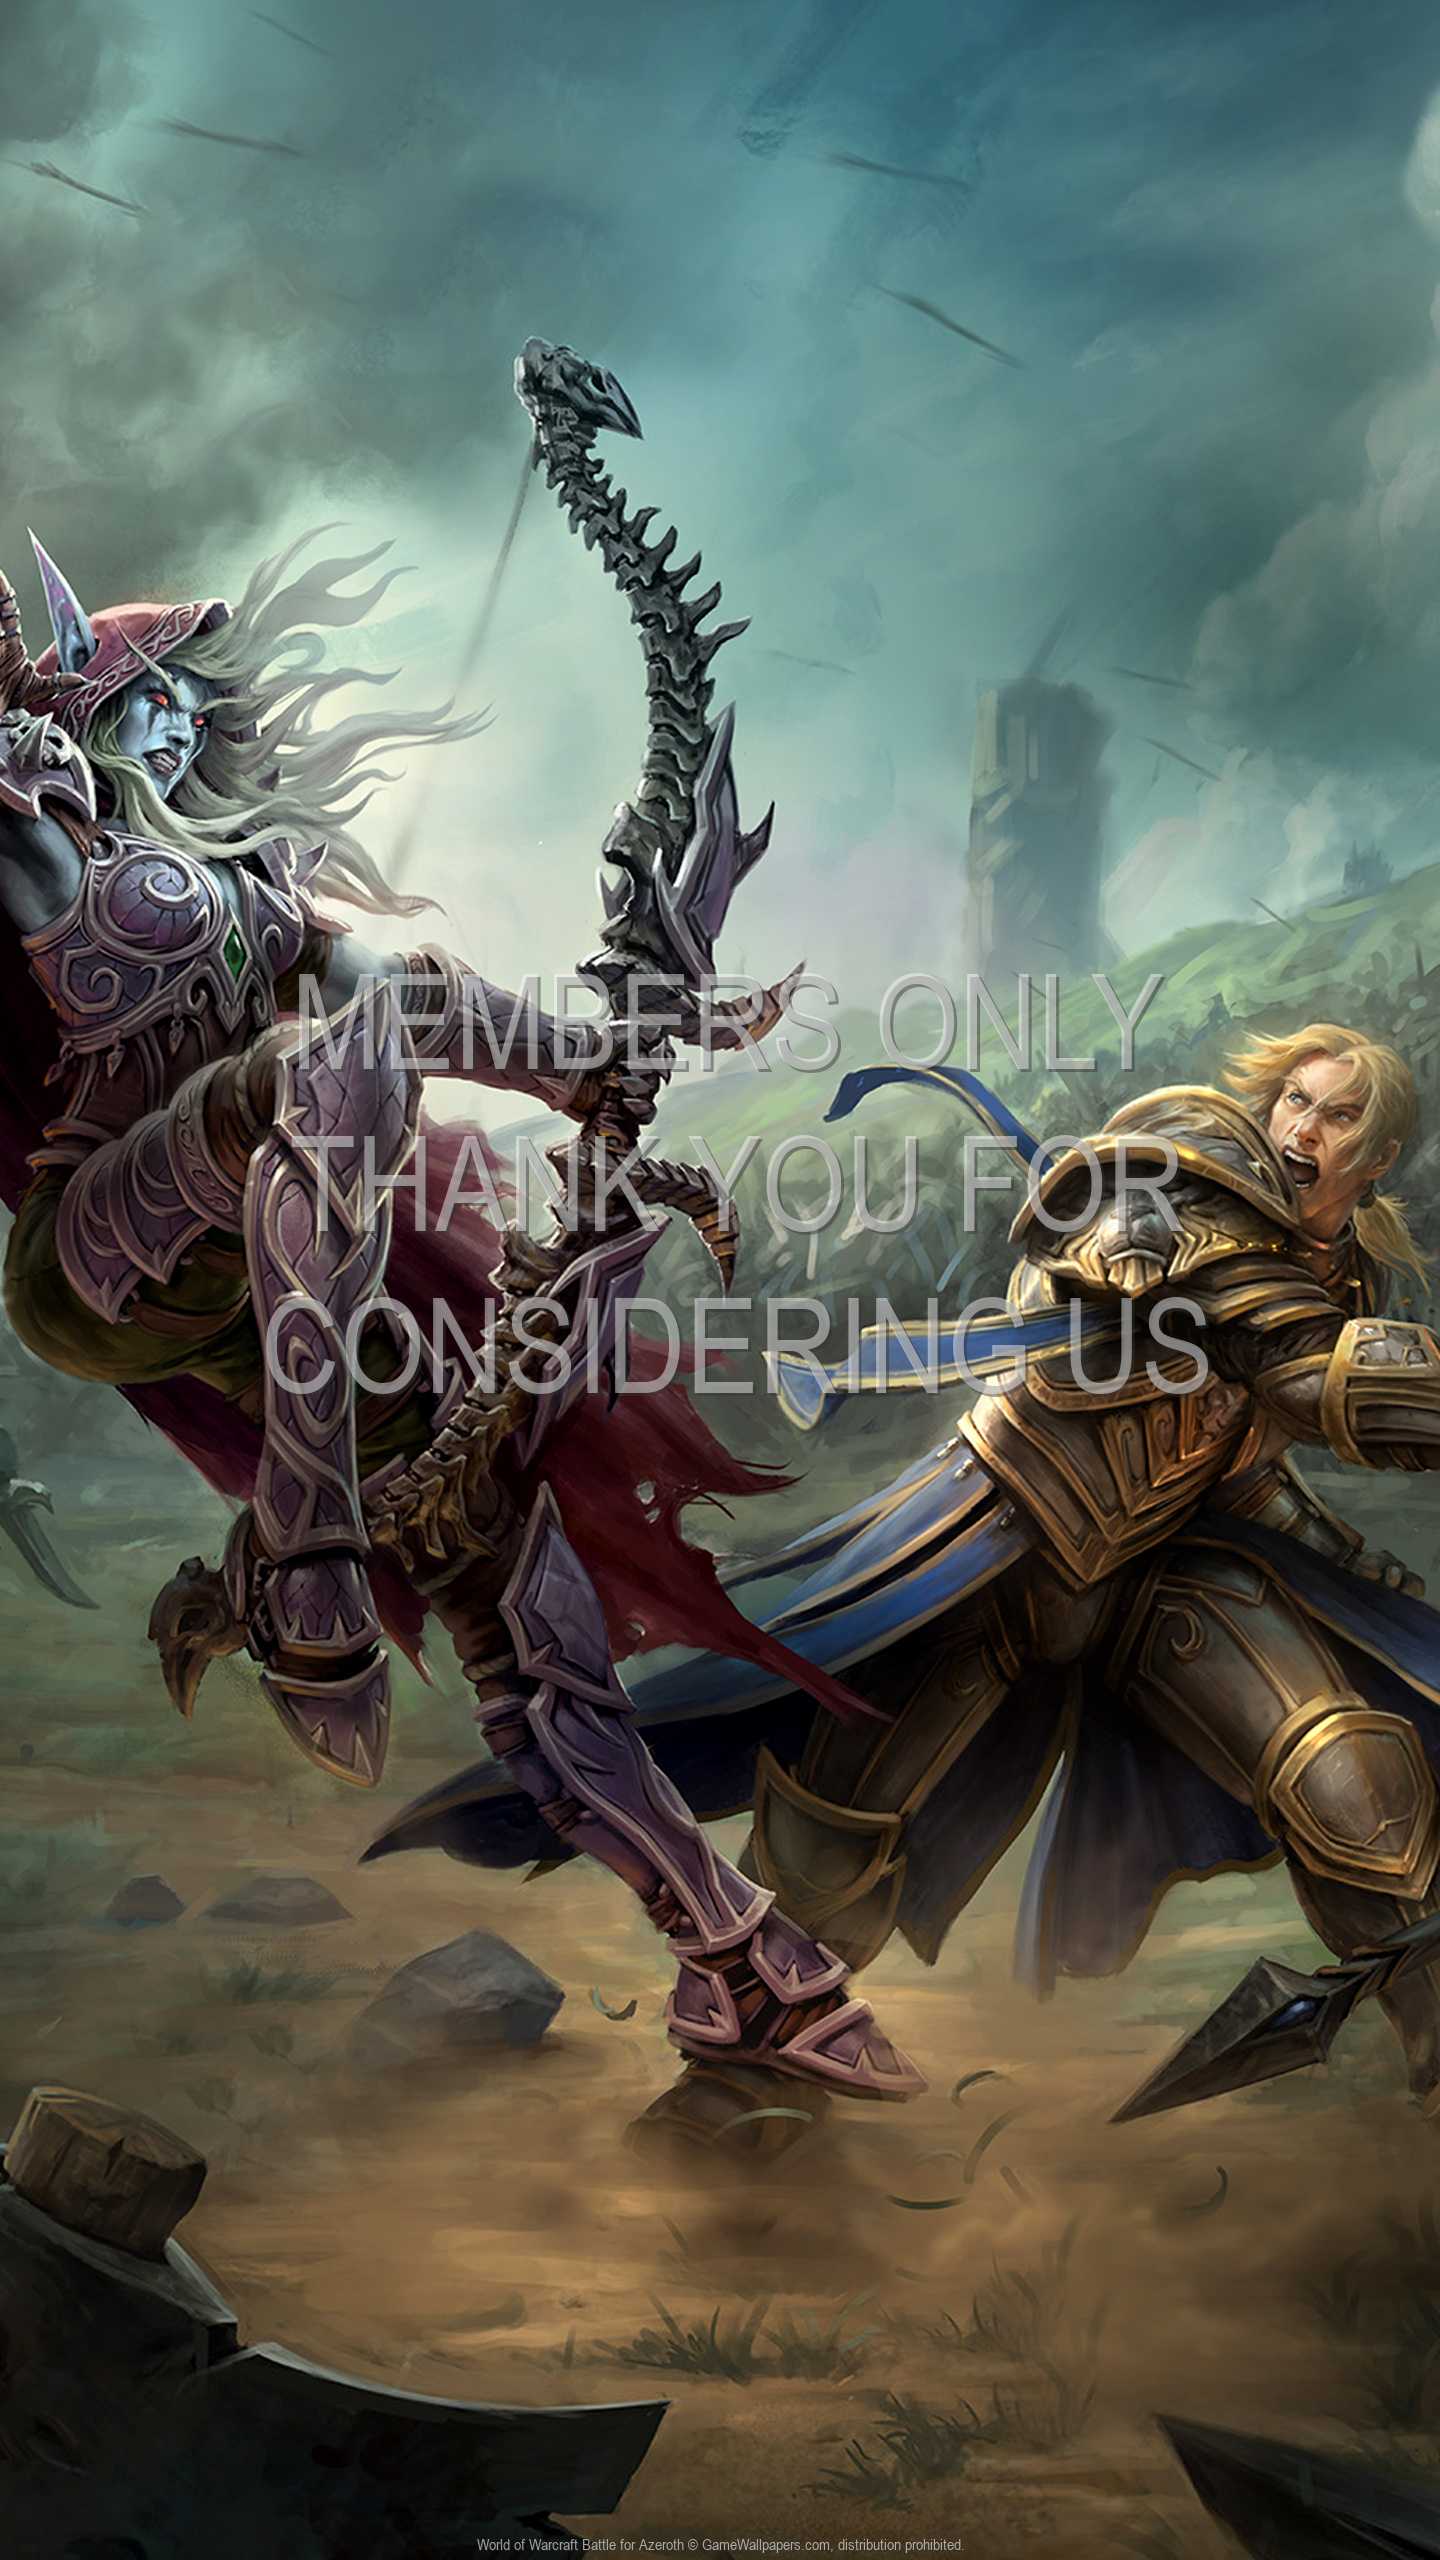 World of Warcraft: Battle for Azeroth 1440p Vertical Mobile fond d'cran 04